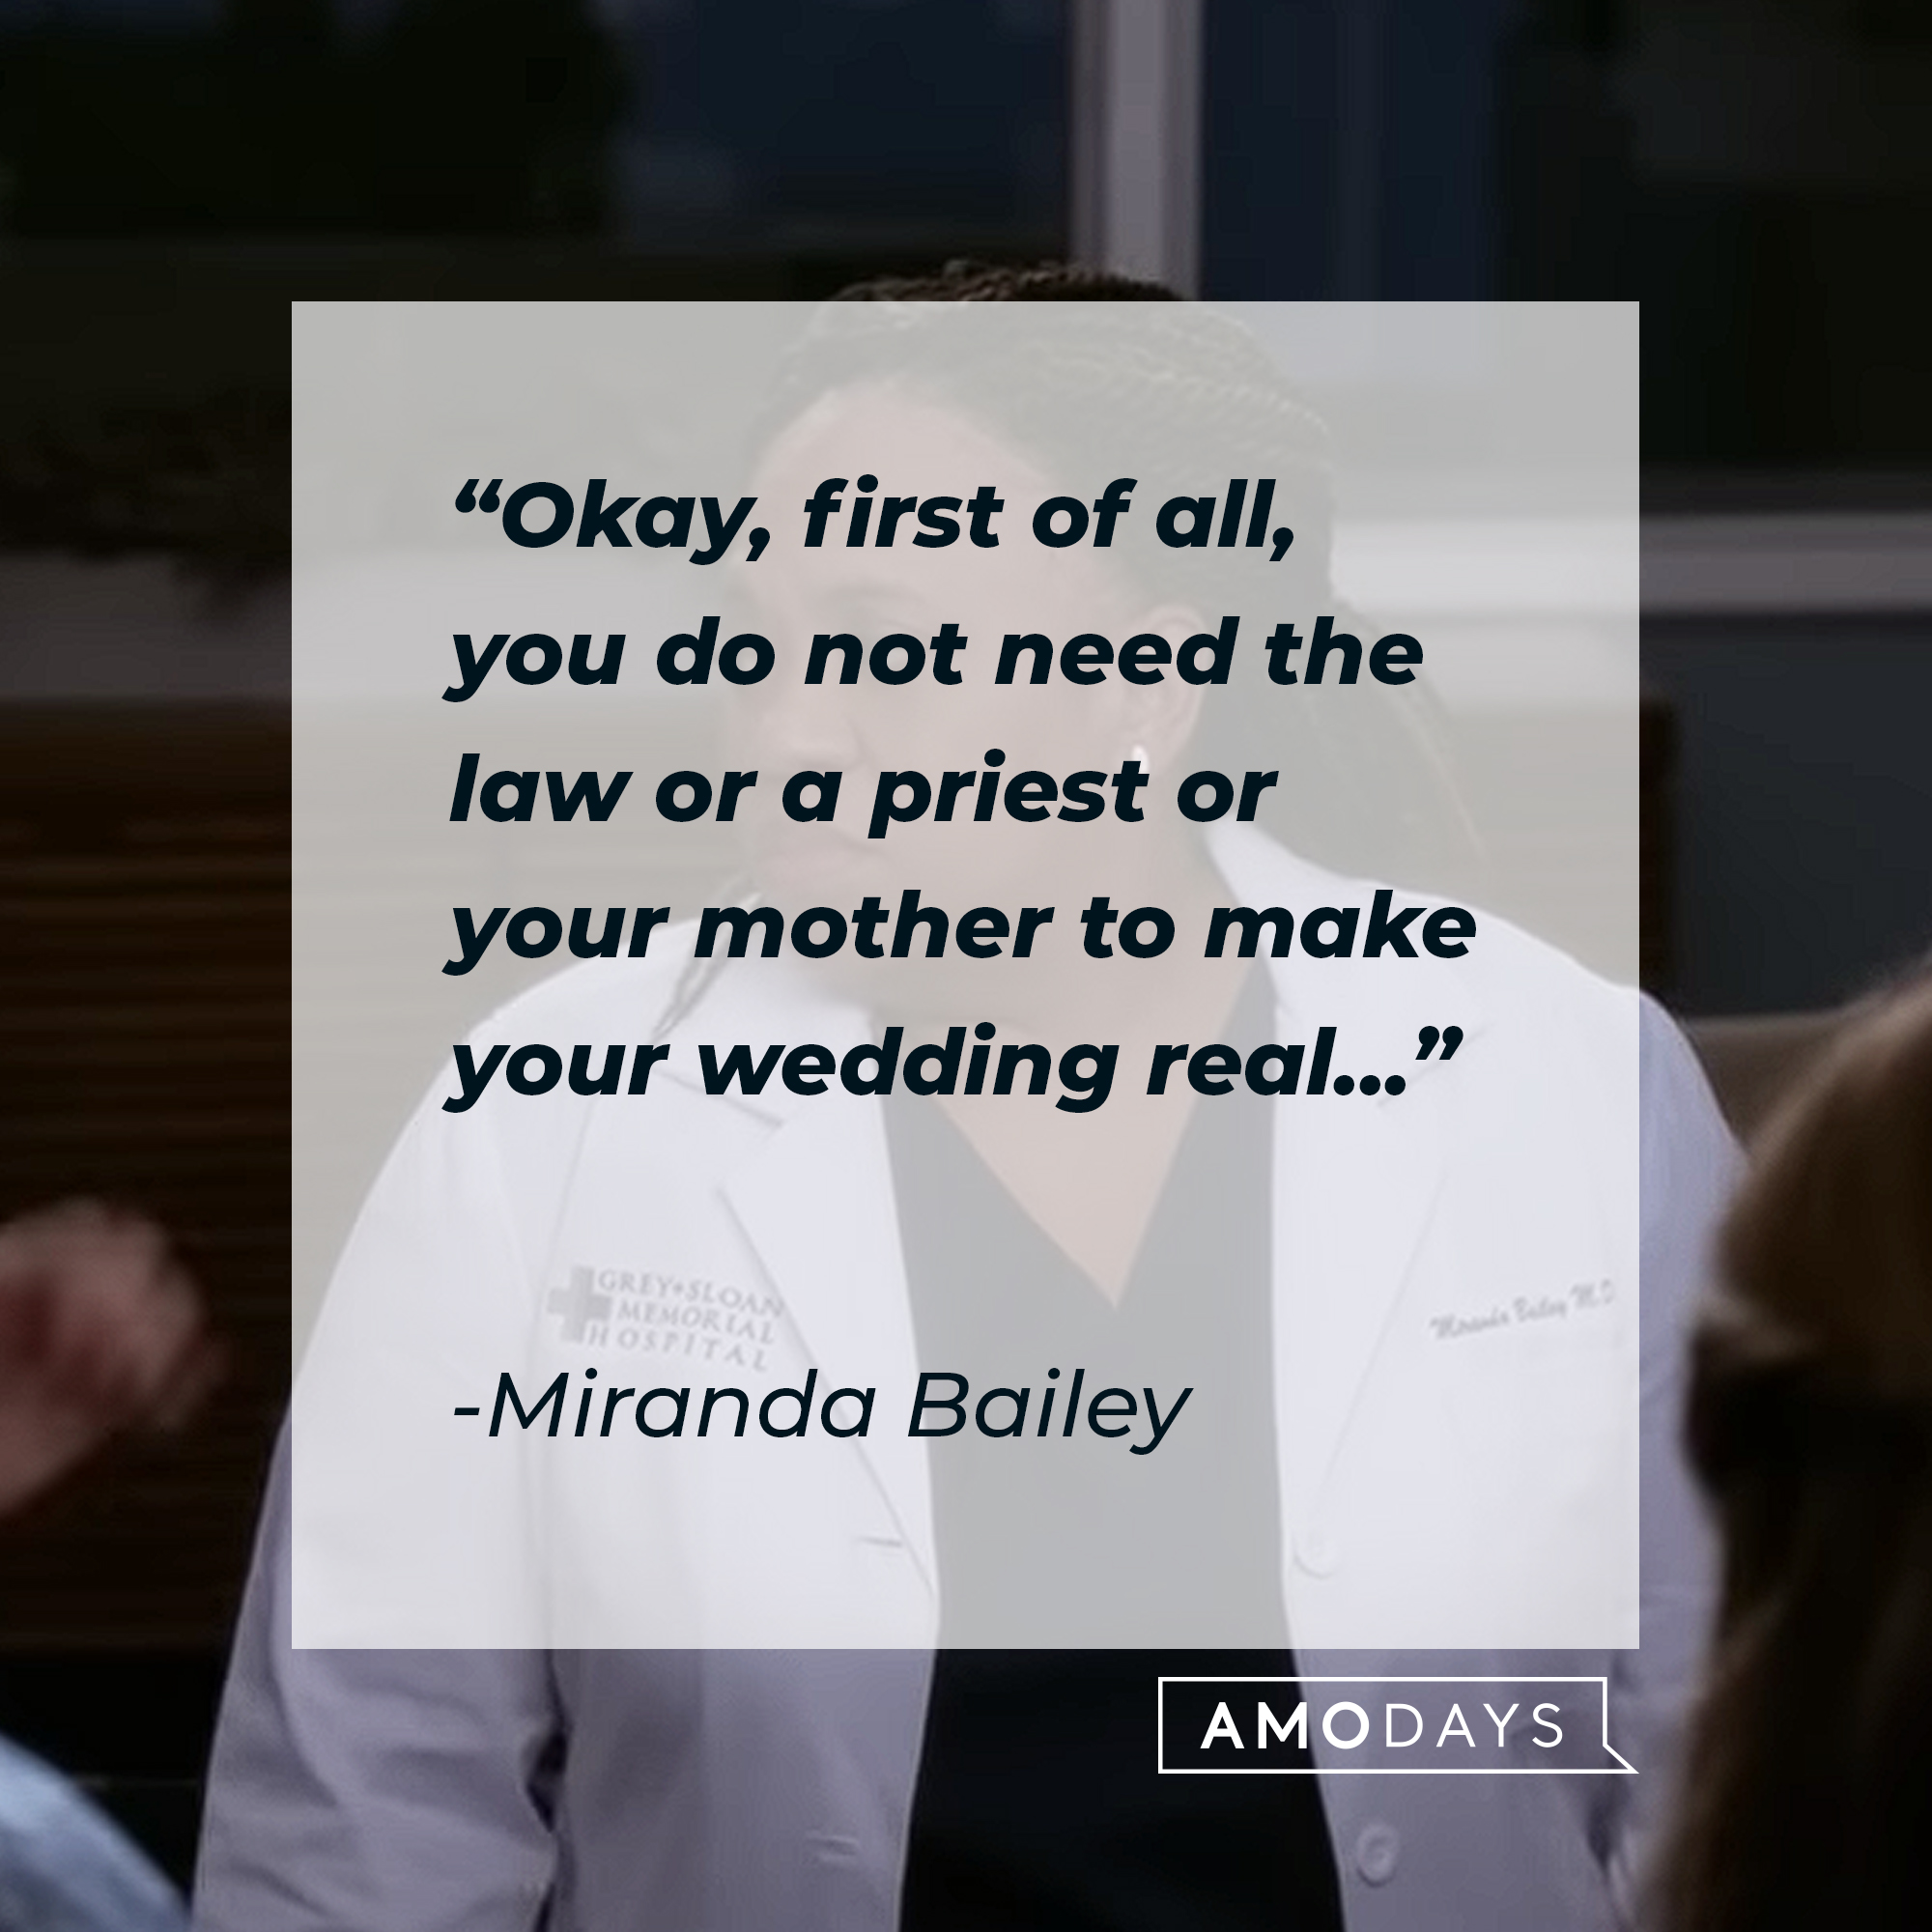 Miranda Bailey's quote: "Okay, first of all, you do not need the law or a priest or your mother to make your wedding real..." | Source: youtube.com/ABCNetwork